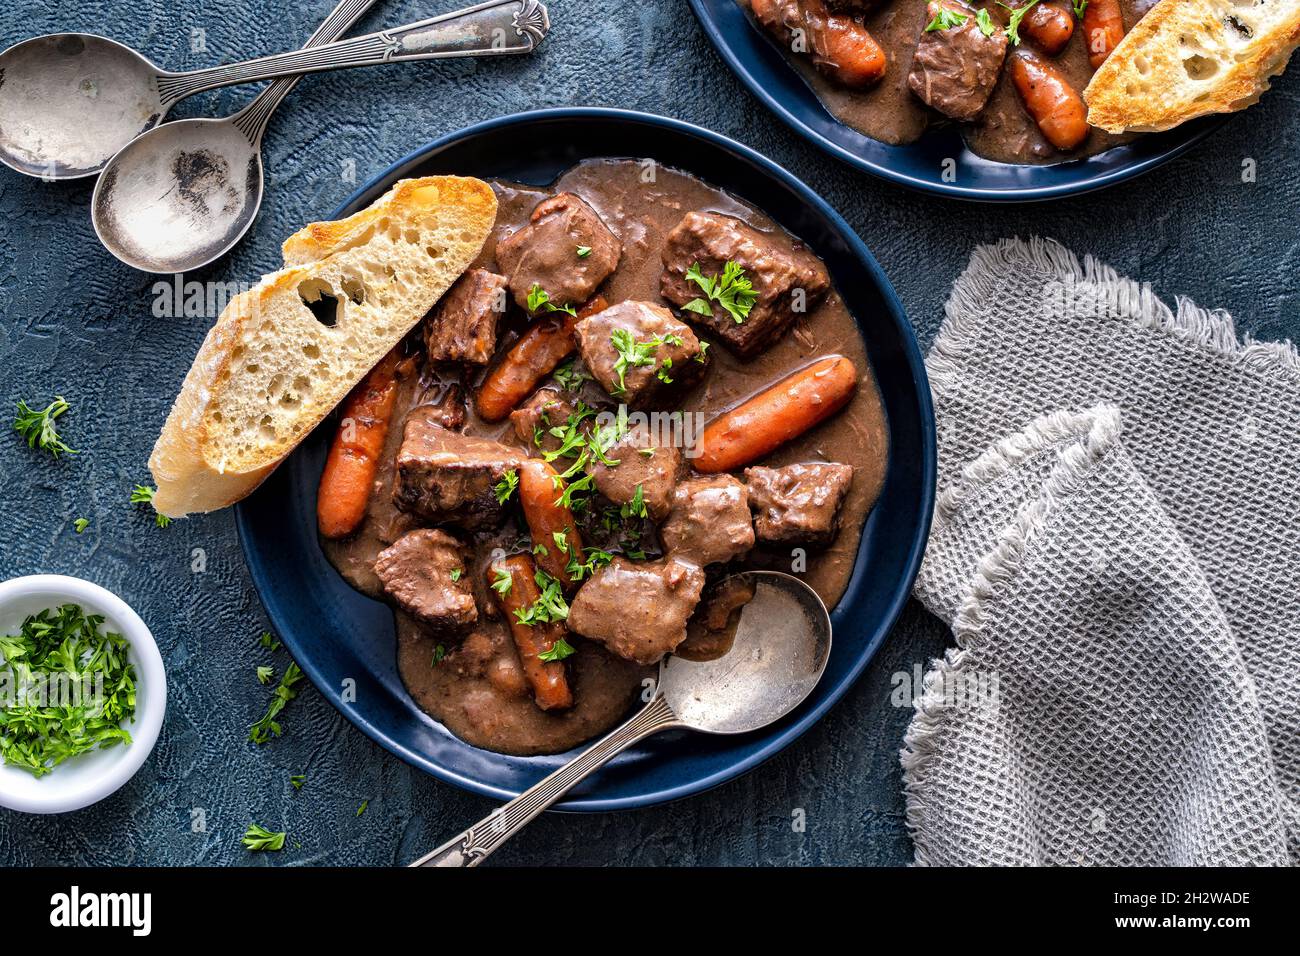 Delicious beef bourguignon stew with wine, carrots and onion garnished with parsley. Stock Photo